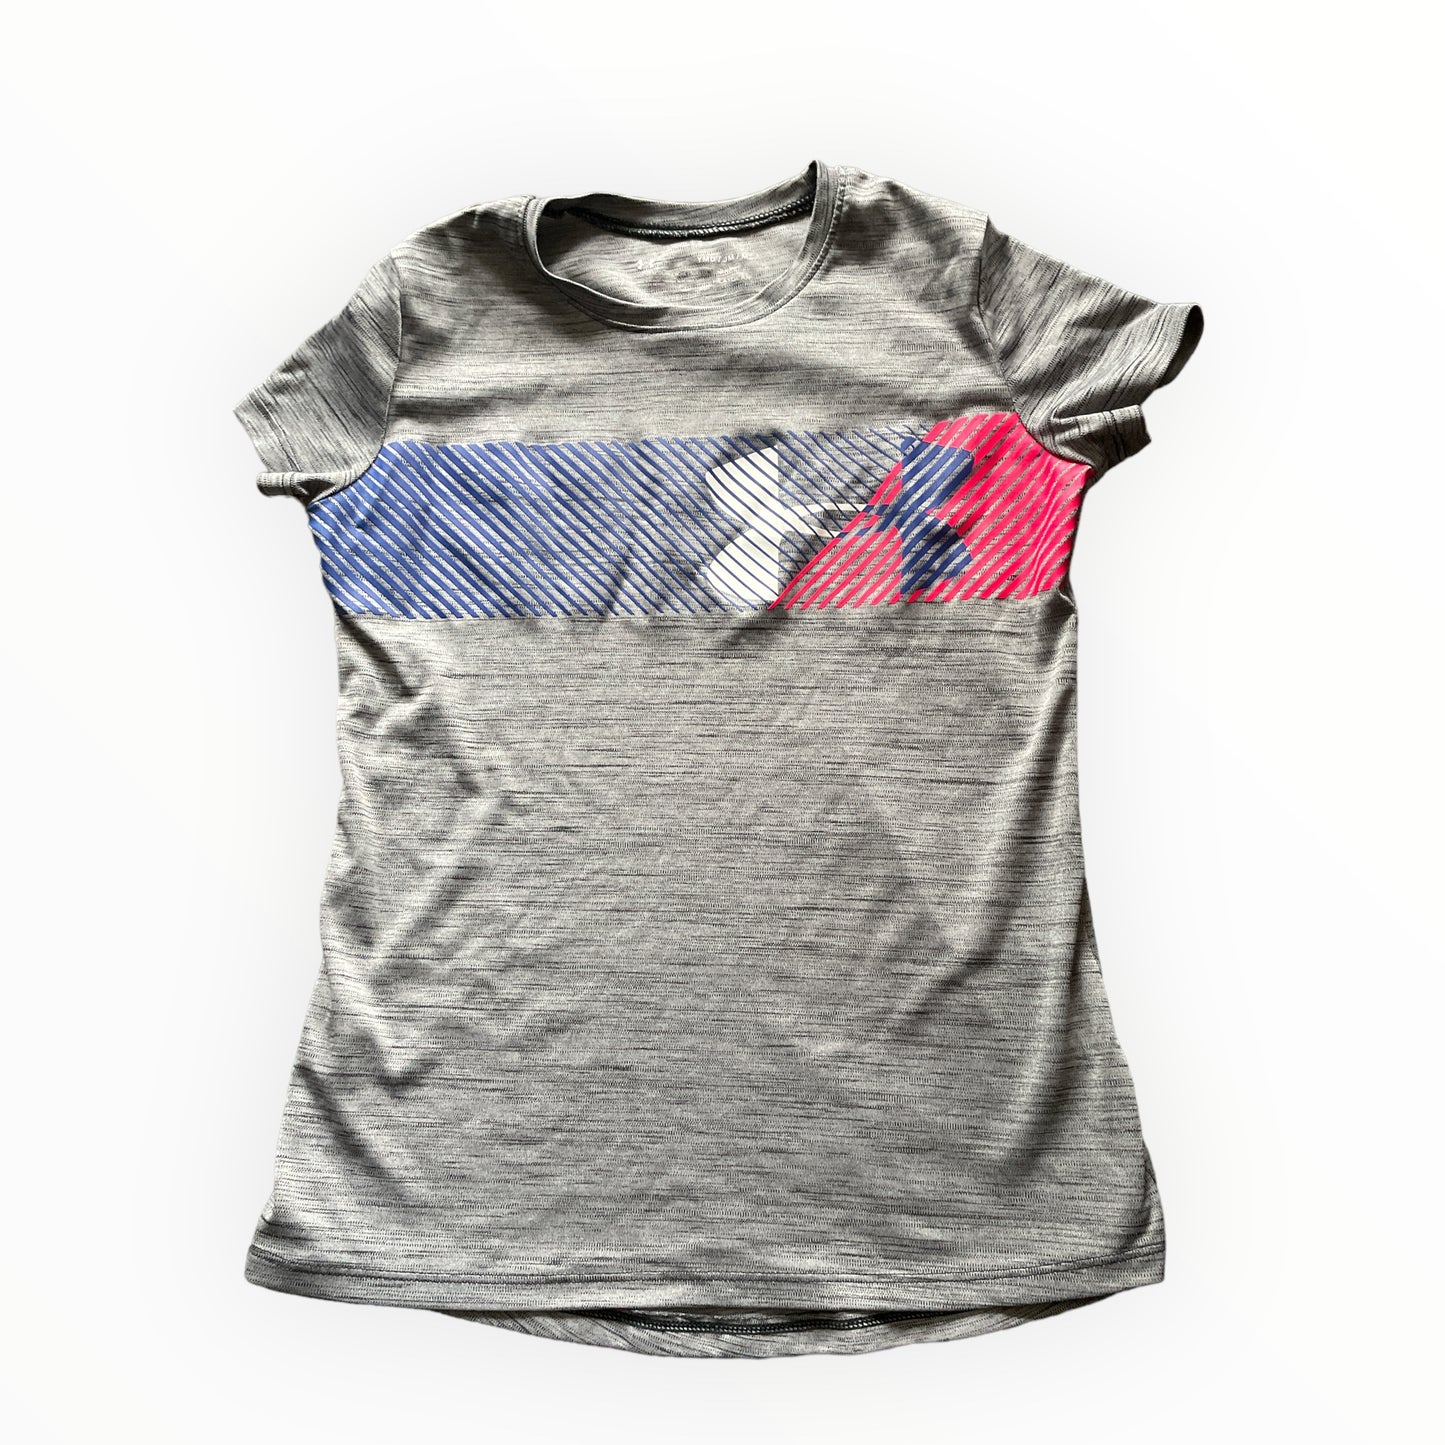 Active t-shirt. Size YMD